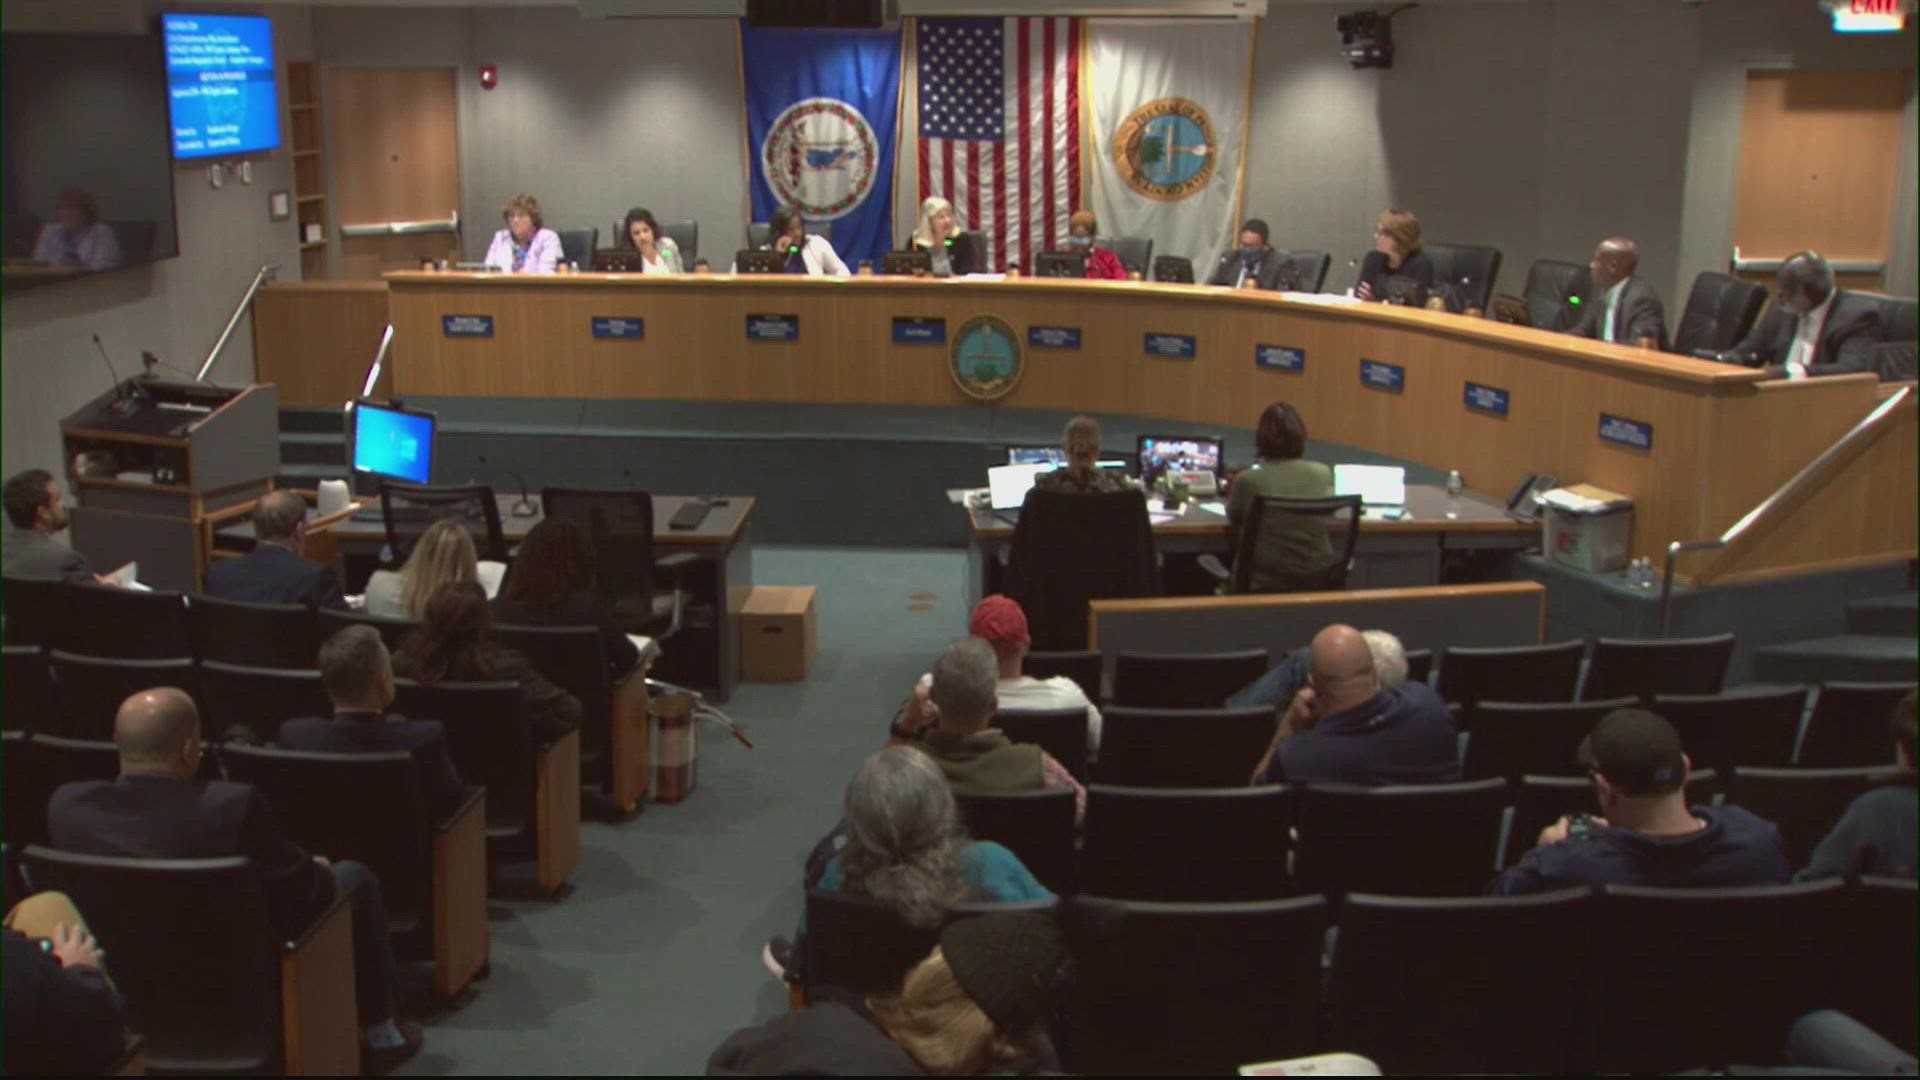 Prince William board of supervisors approve a controversial plan to expand data centers across the county.